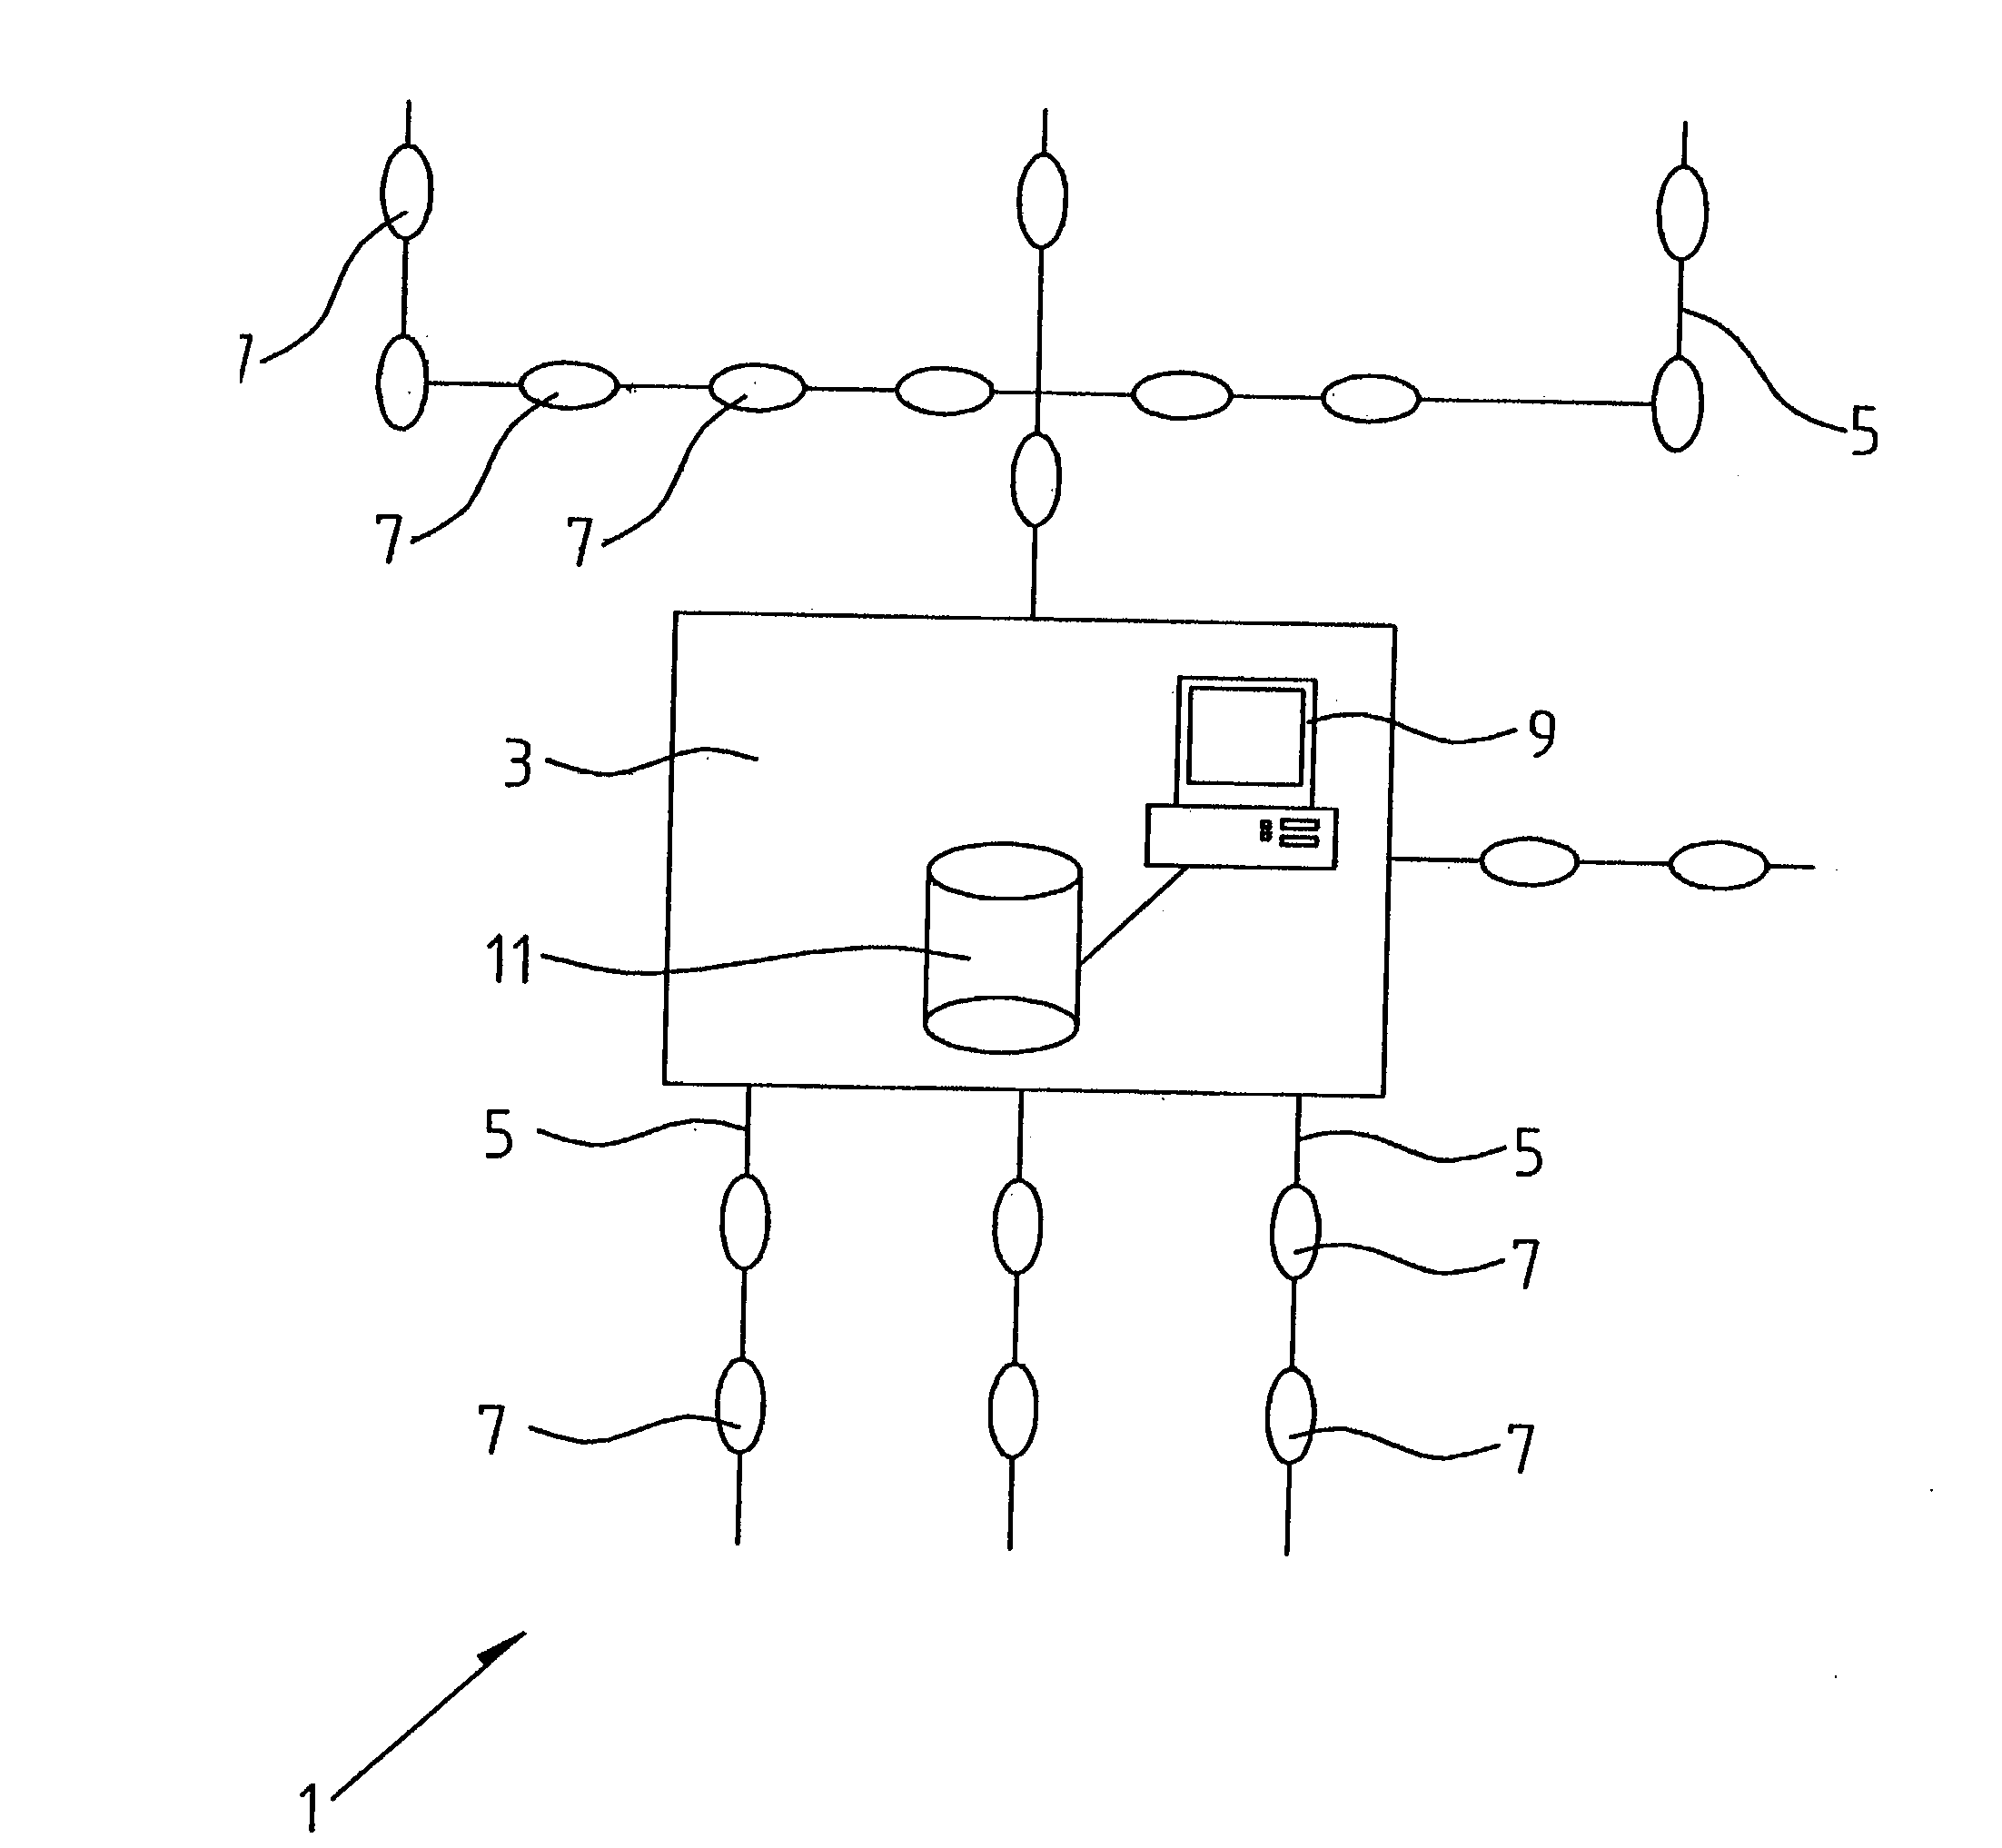 Method of Monitoring Line Faults in a Medium Voltage Network